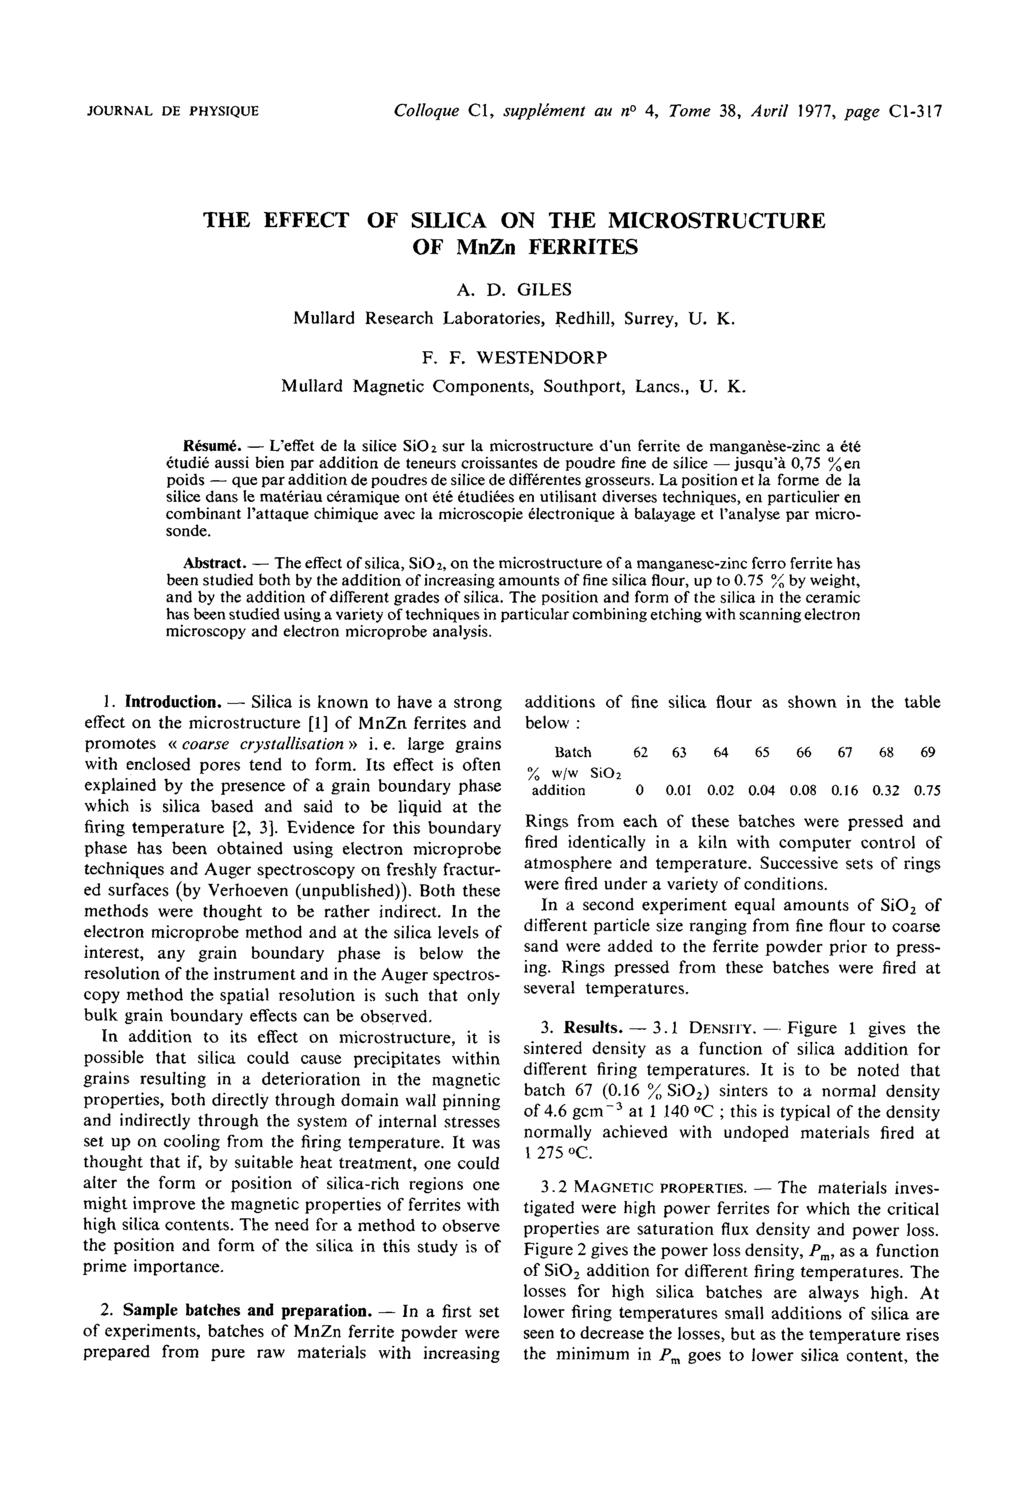 JOURNAL DE PHYSIQUE Colloque Cl, supplkment au no 4, Tome 38, Aoril 1977, page Cl-317 THE EFFECT OF SILICA ON THE MICROSTRUCTURE OF MnZn FERRITES A. D. GILES Mullard Research Laboratories, Redhill, Surrey, U.